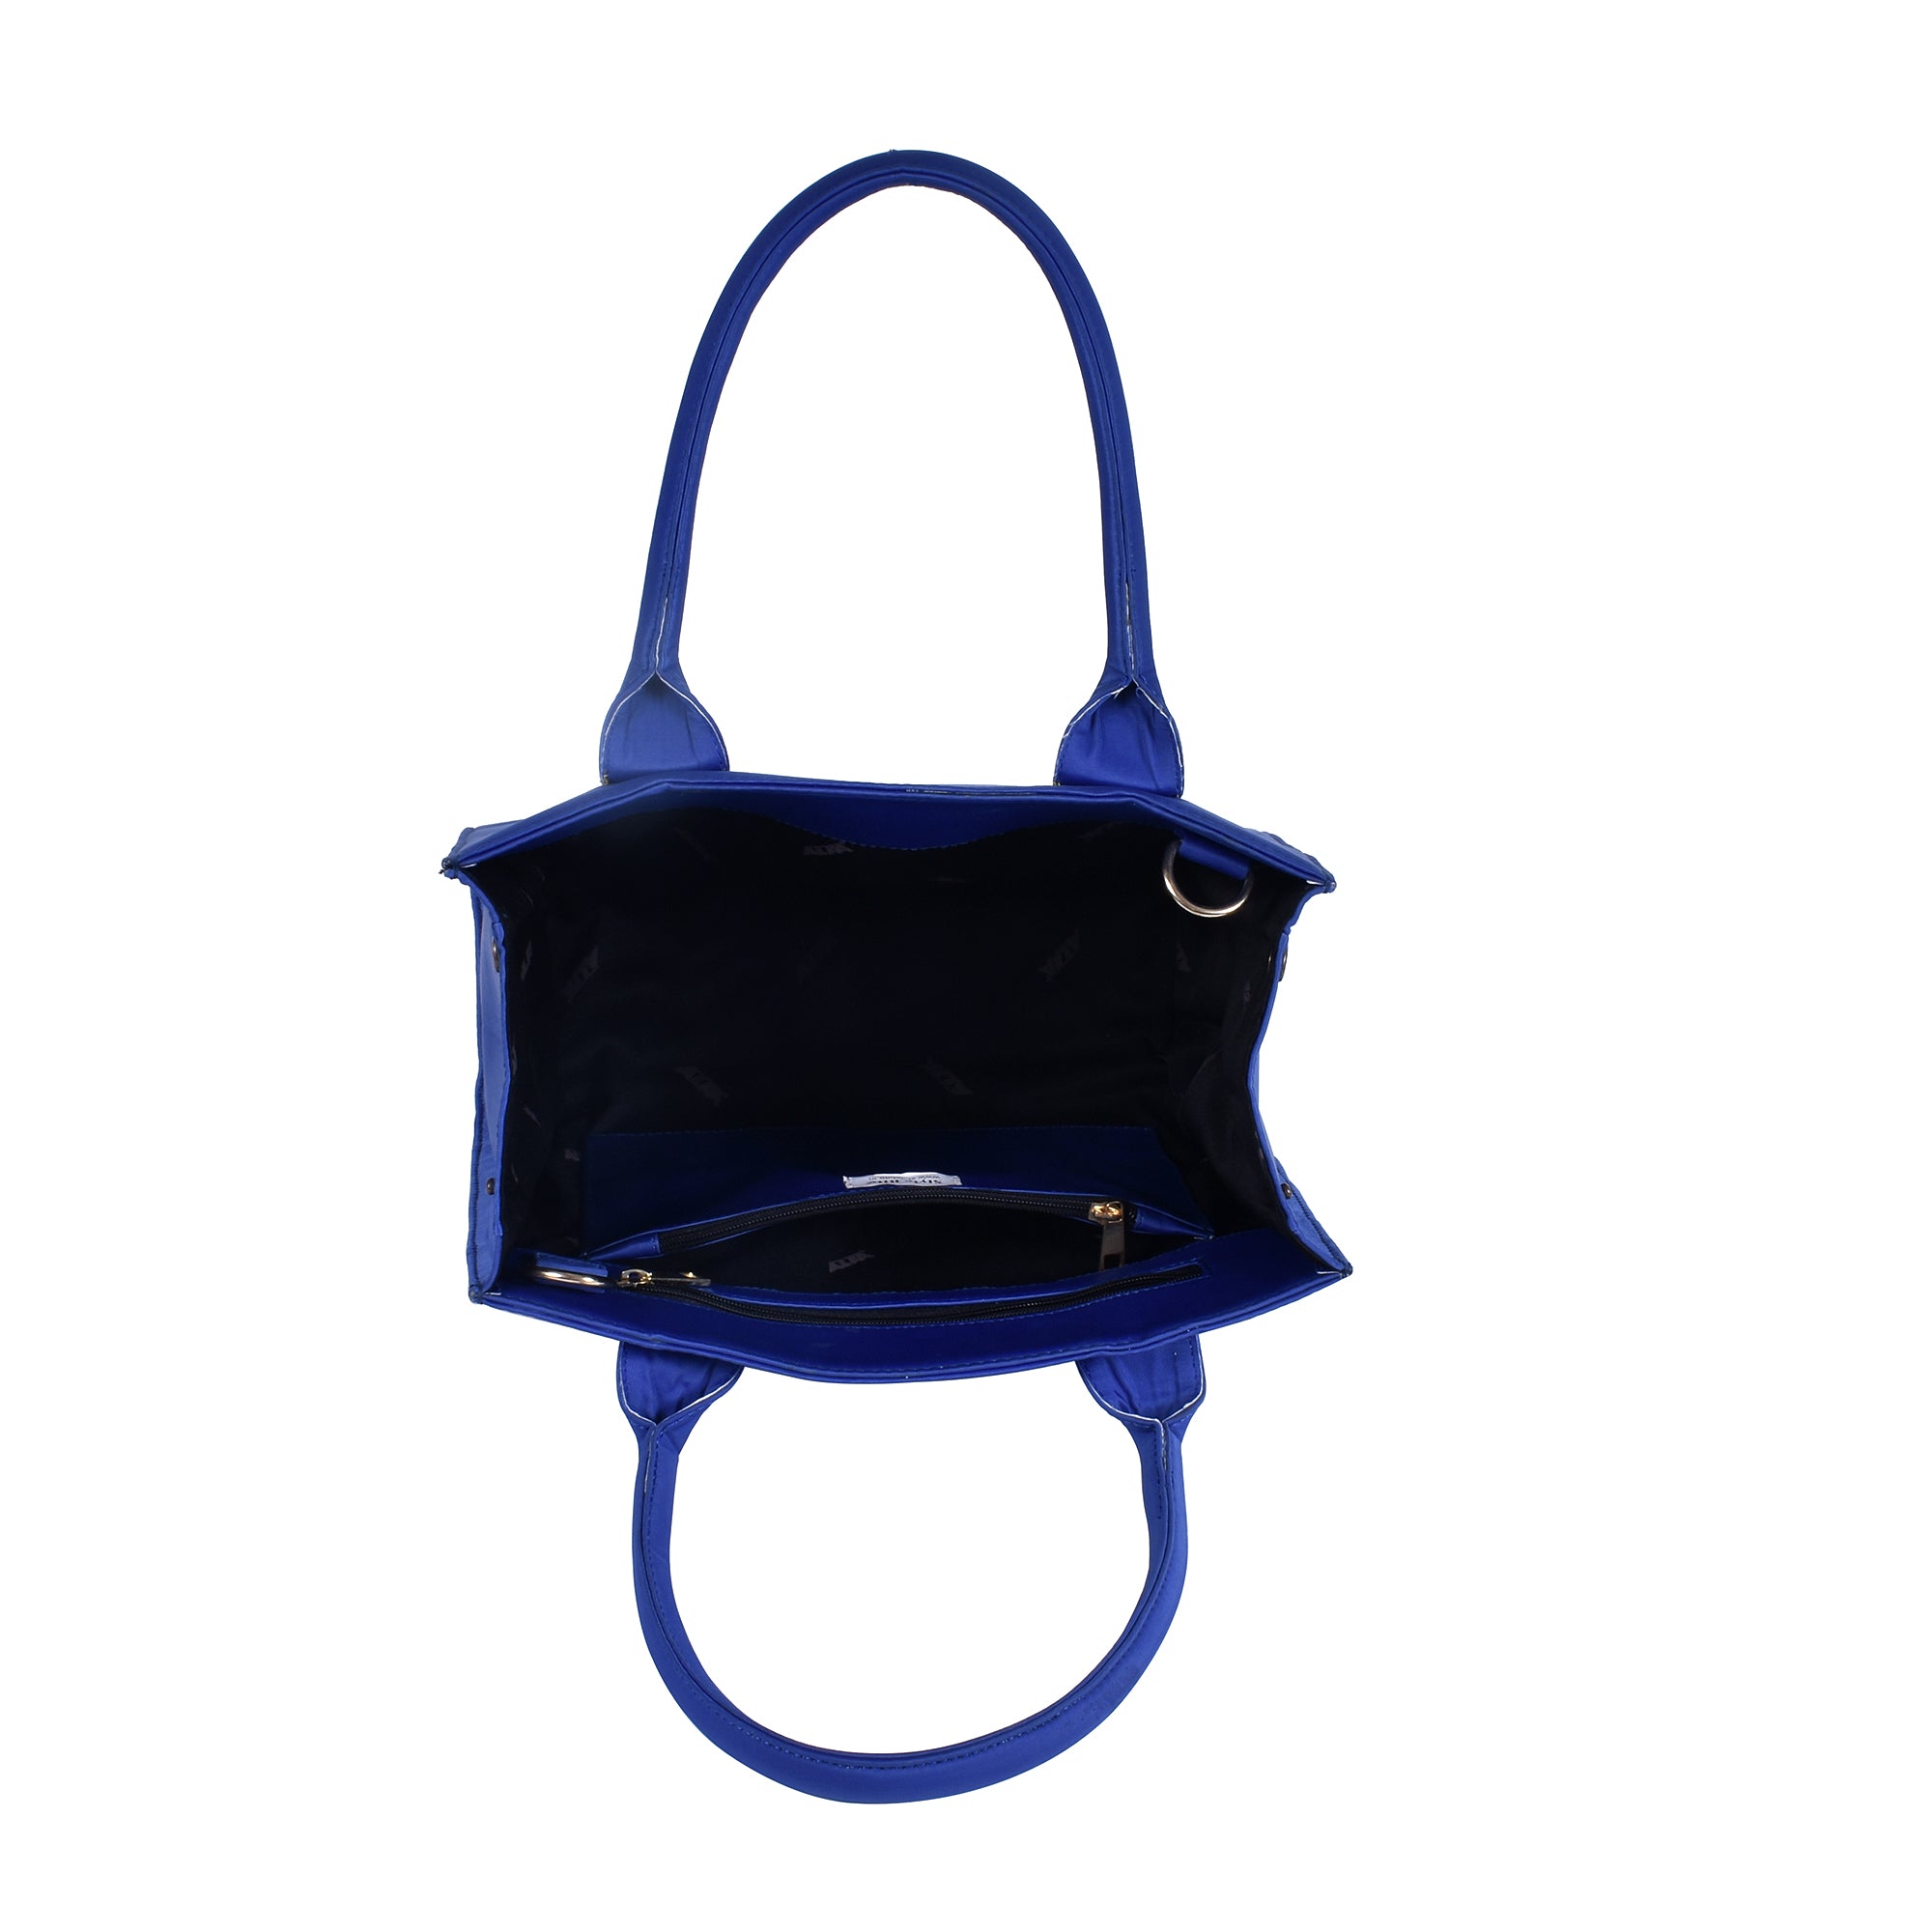 Women's Tote Bag With Adjustable Strap - Style Bite